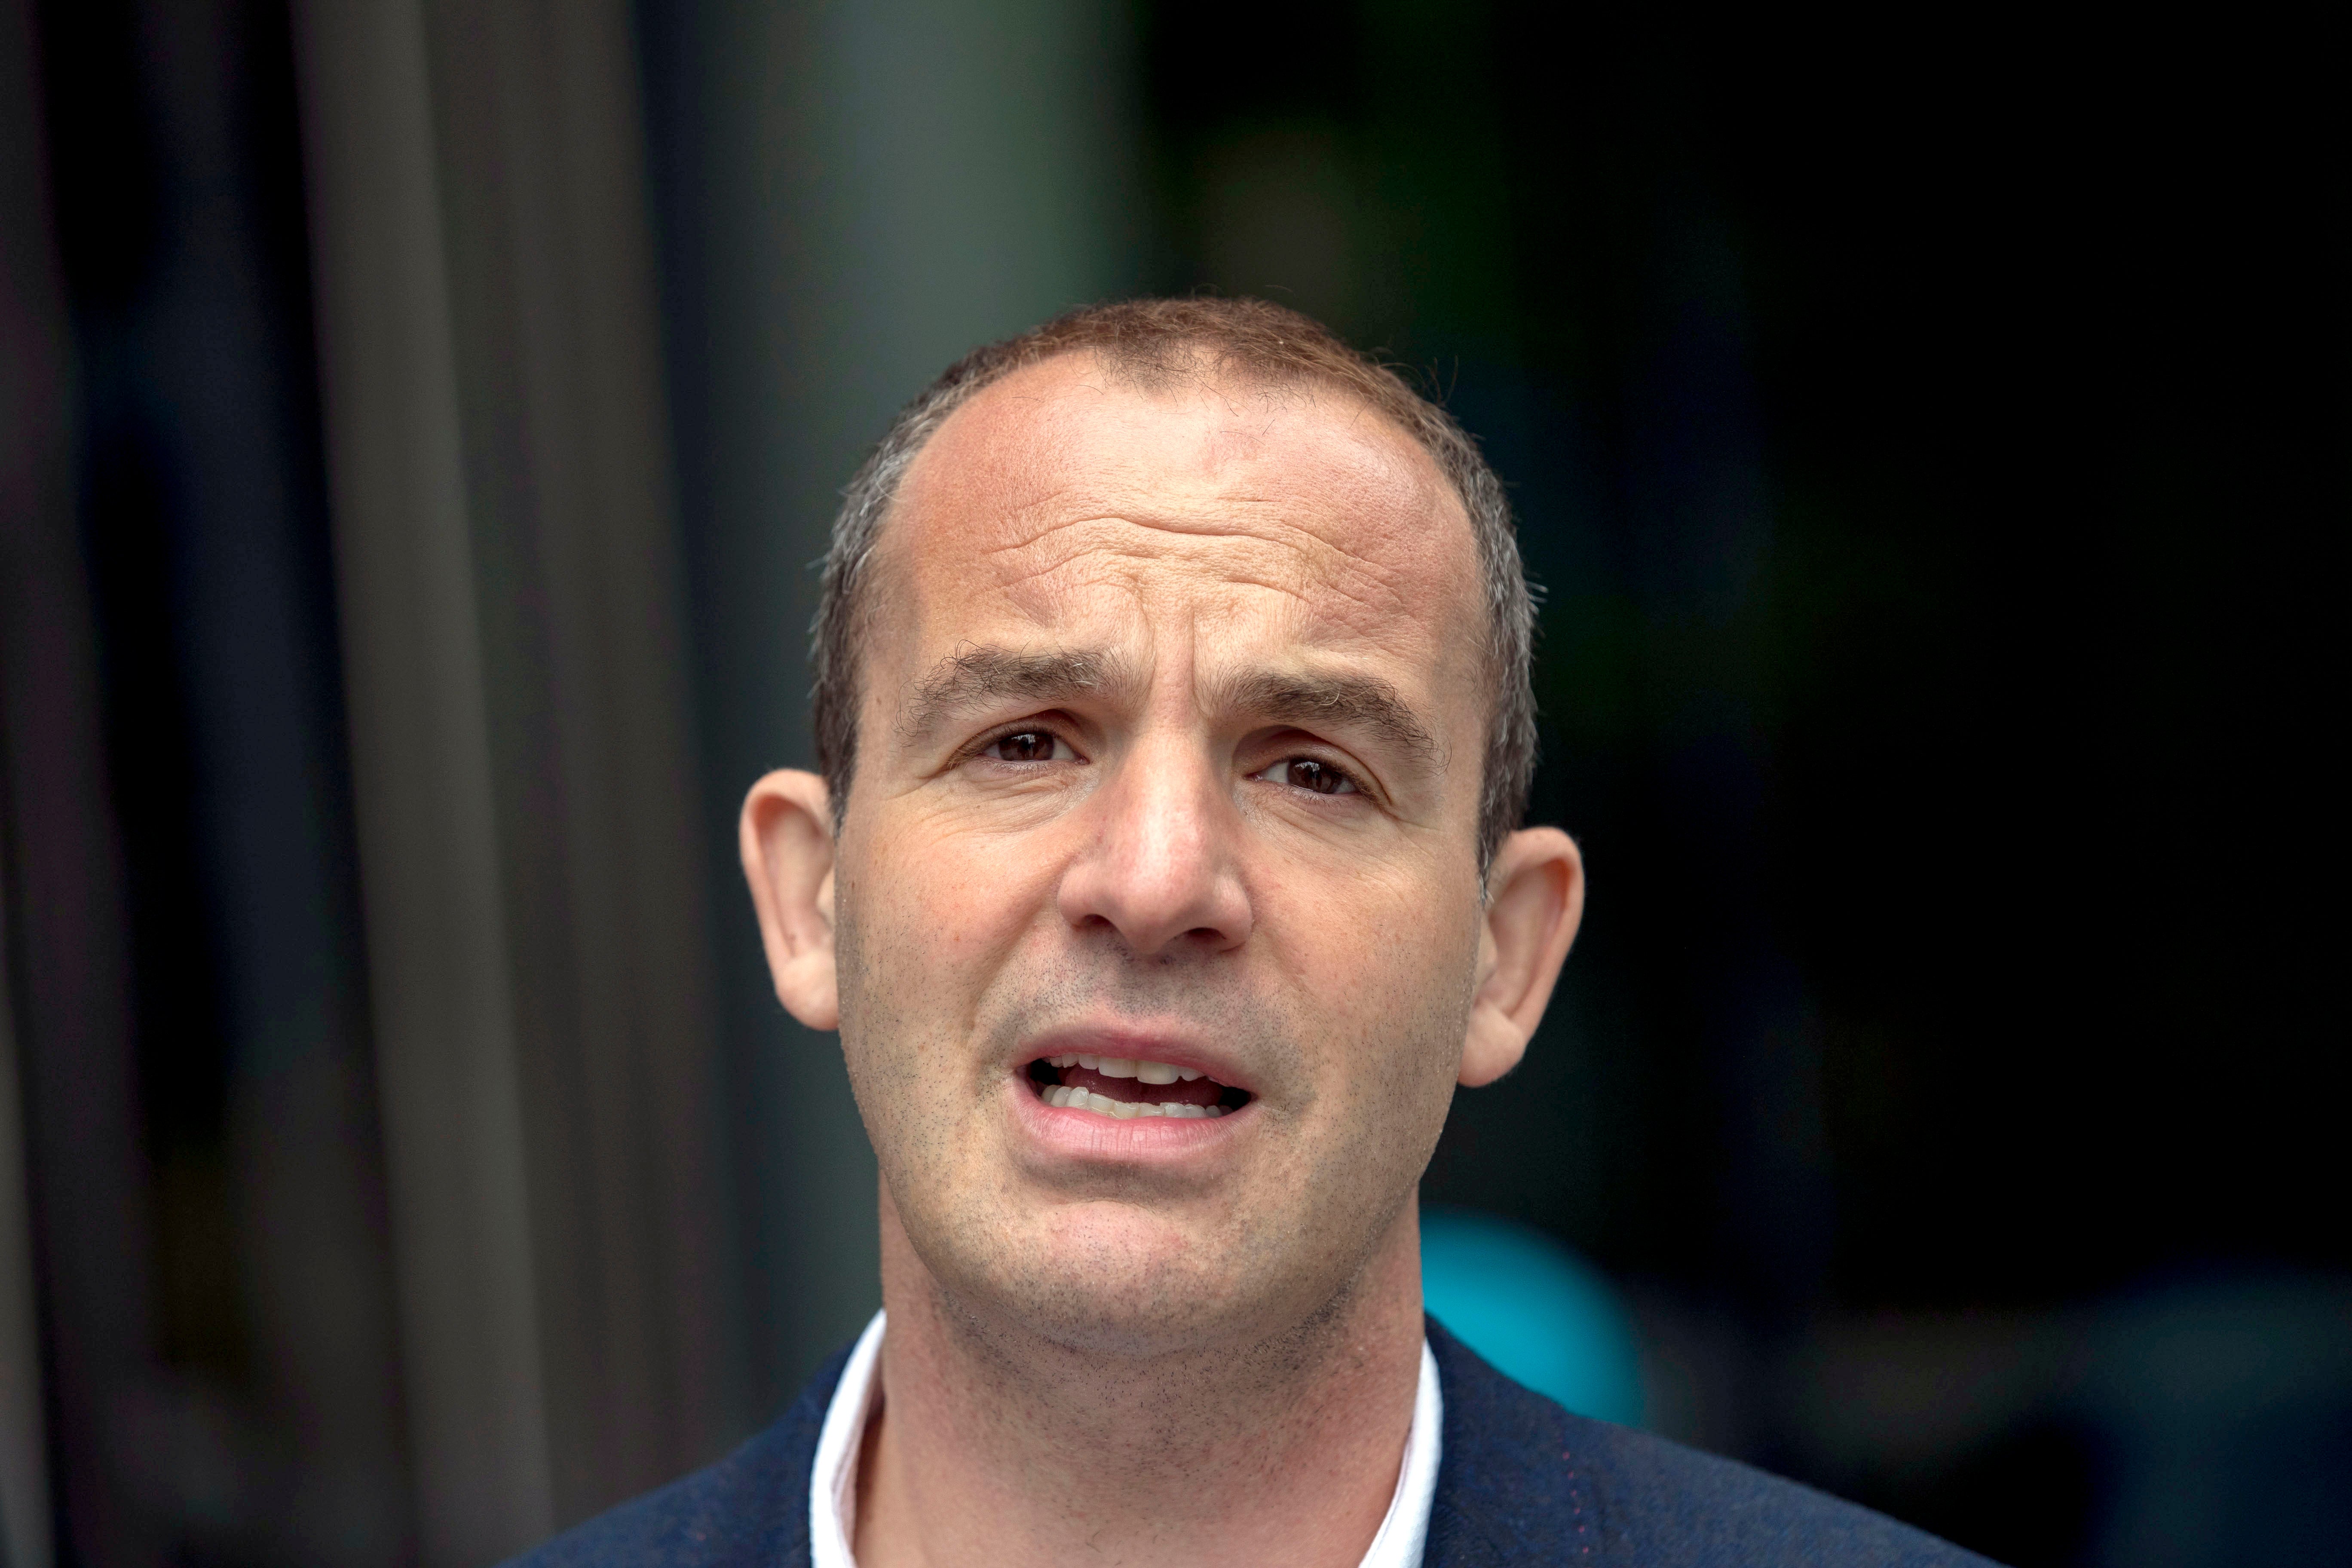 Consumer champion Martin Lewis believes savings from switching will likely relatively reduce (Steve Parsons/PA)